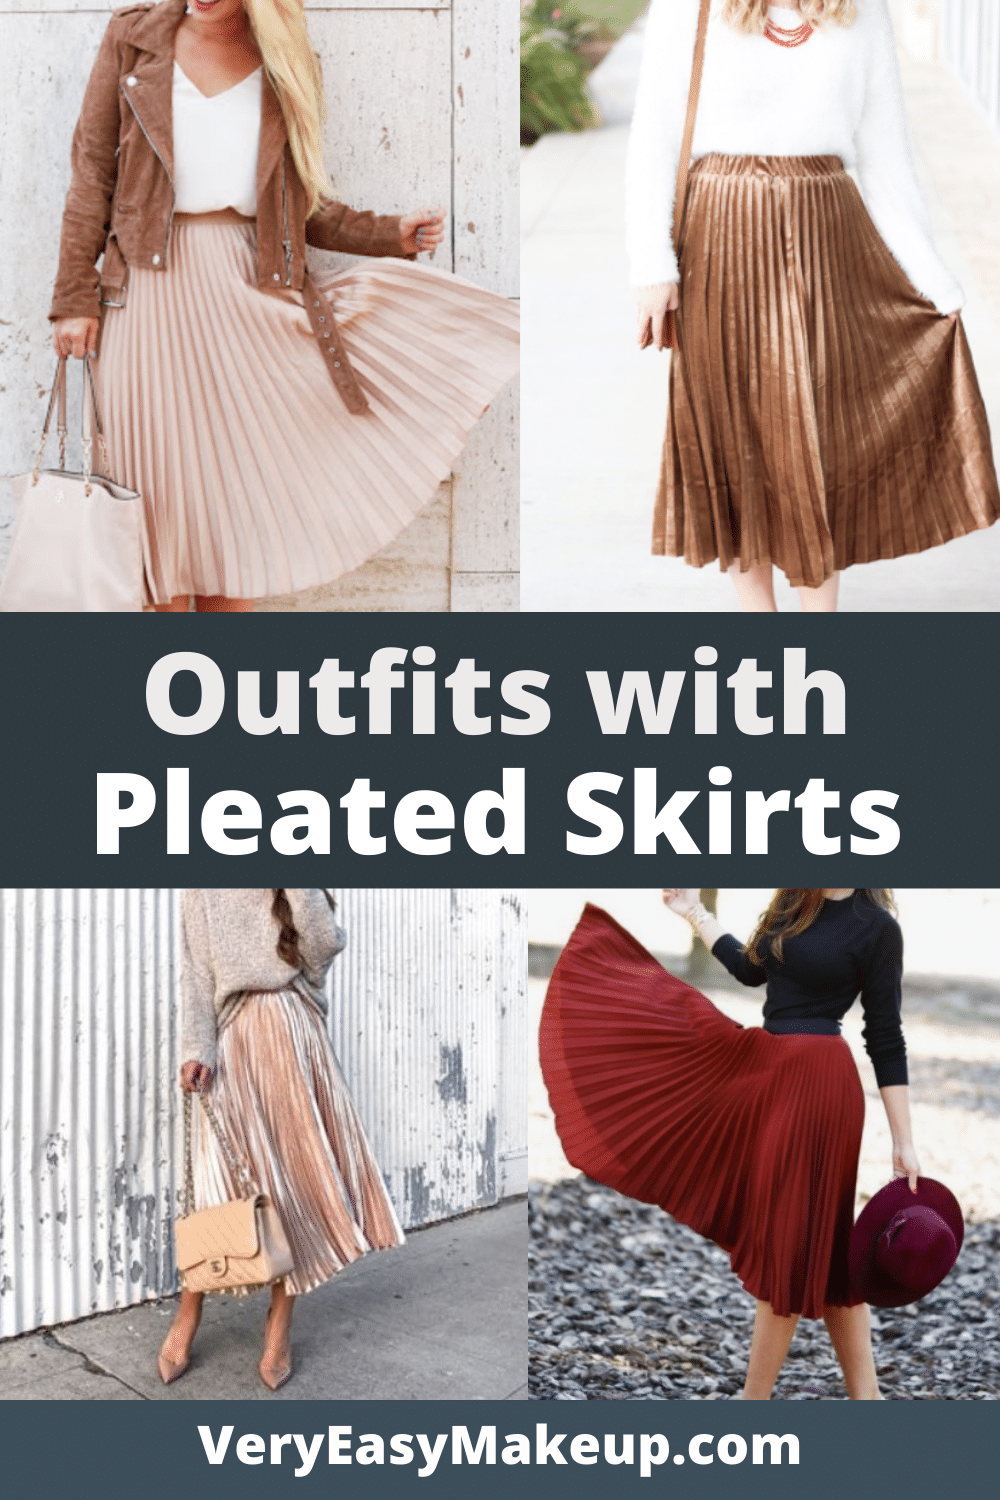 Outfit Ideas with Pleated Skirts by Very Easy Makeup